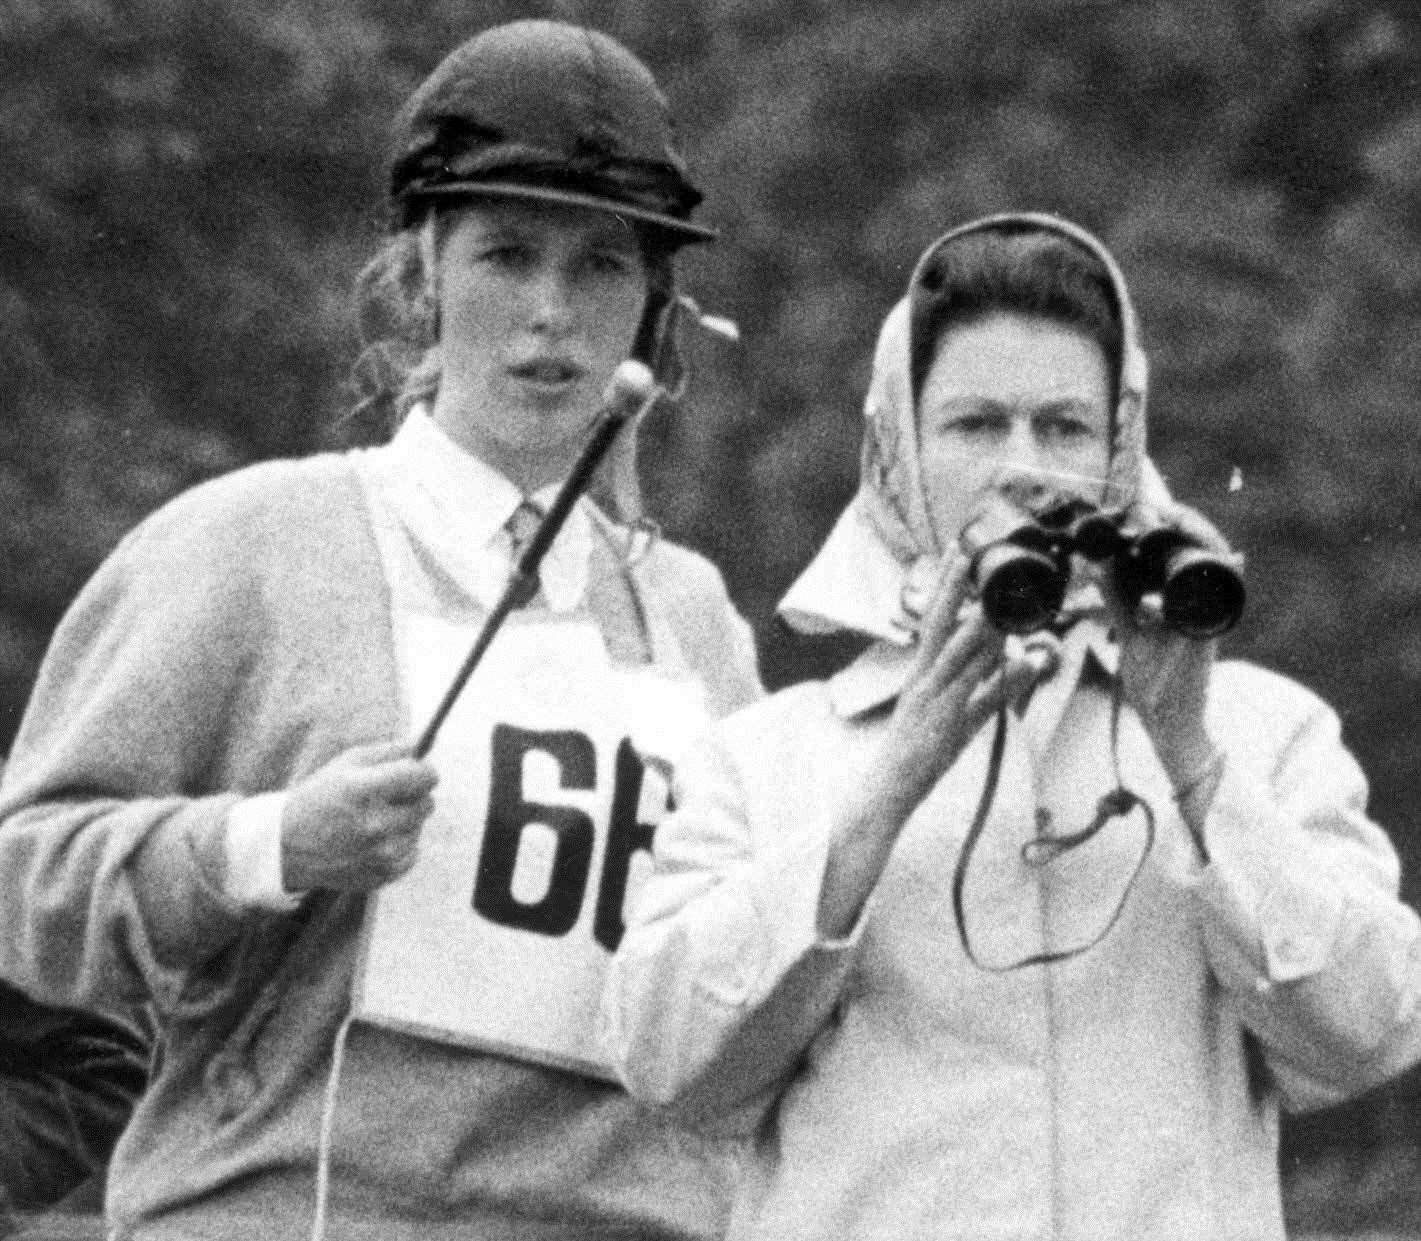 Mother and daughter took a keen interest in Eridge Horse Trials in August 1968. The Queen presented the trophies - including a rosette to Princess Anne who took fifth place in the class for novice under-21s